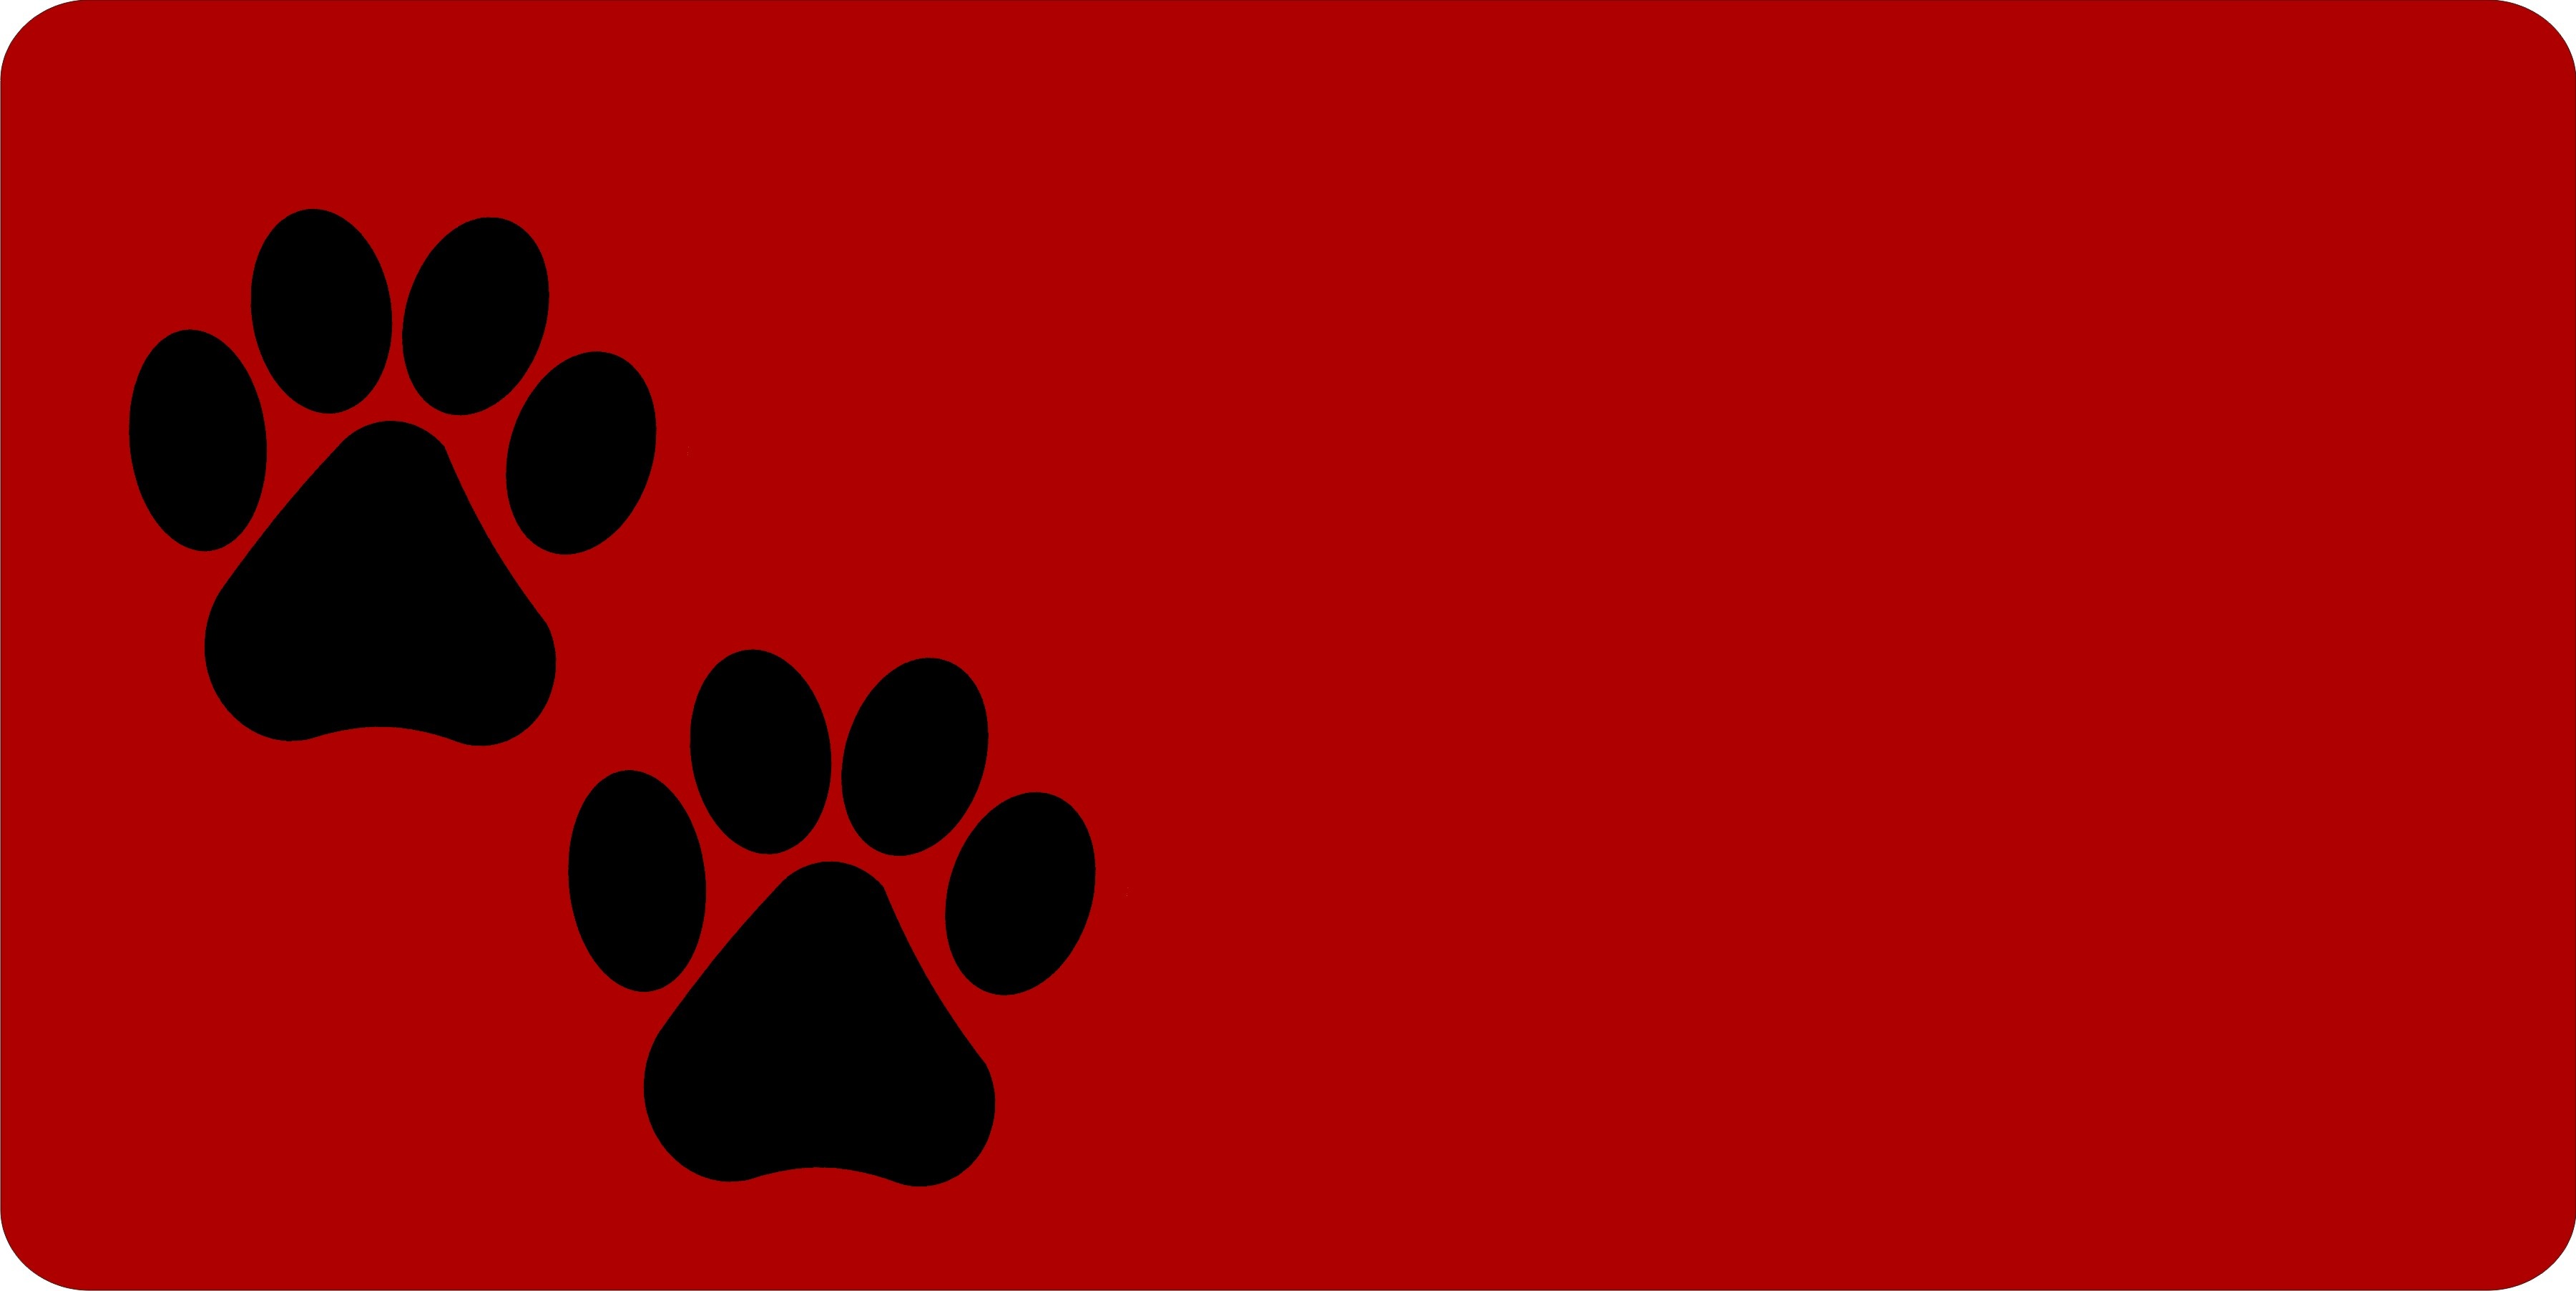 License Plates Online Black Paw Prints Offset On Red License Plate Free Personalization on this plate